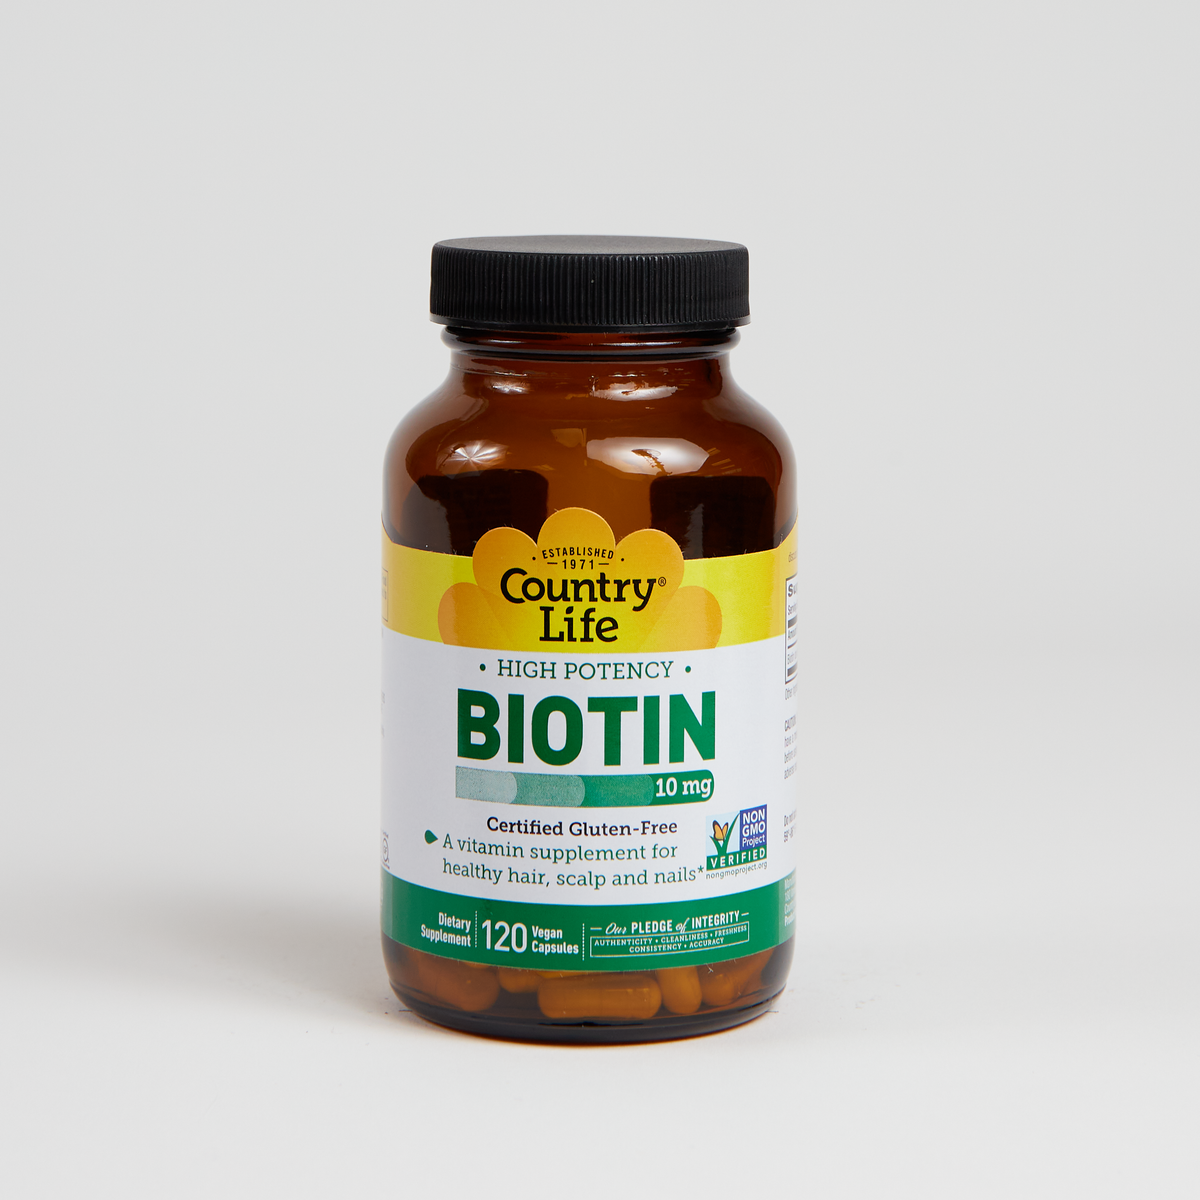 Country Life Biotin 10 mg 120 Count - 120 Count